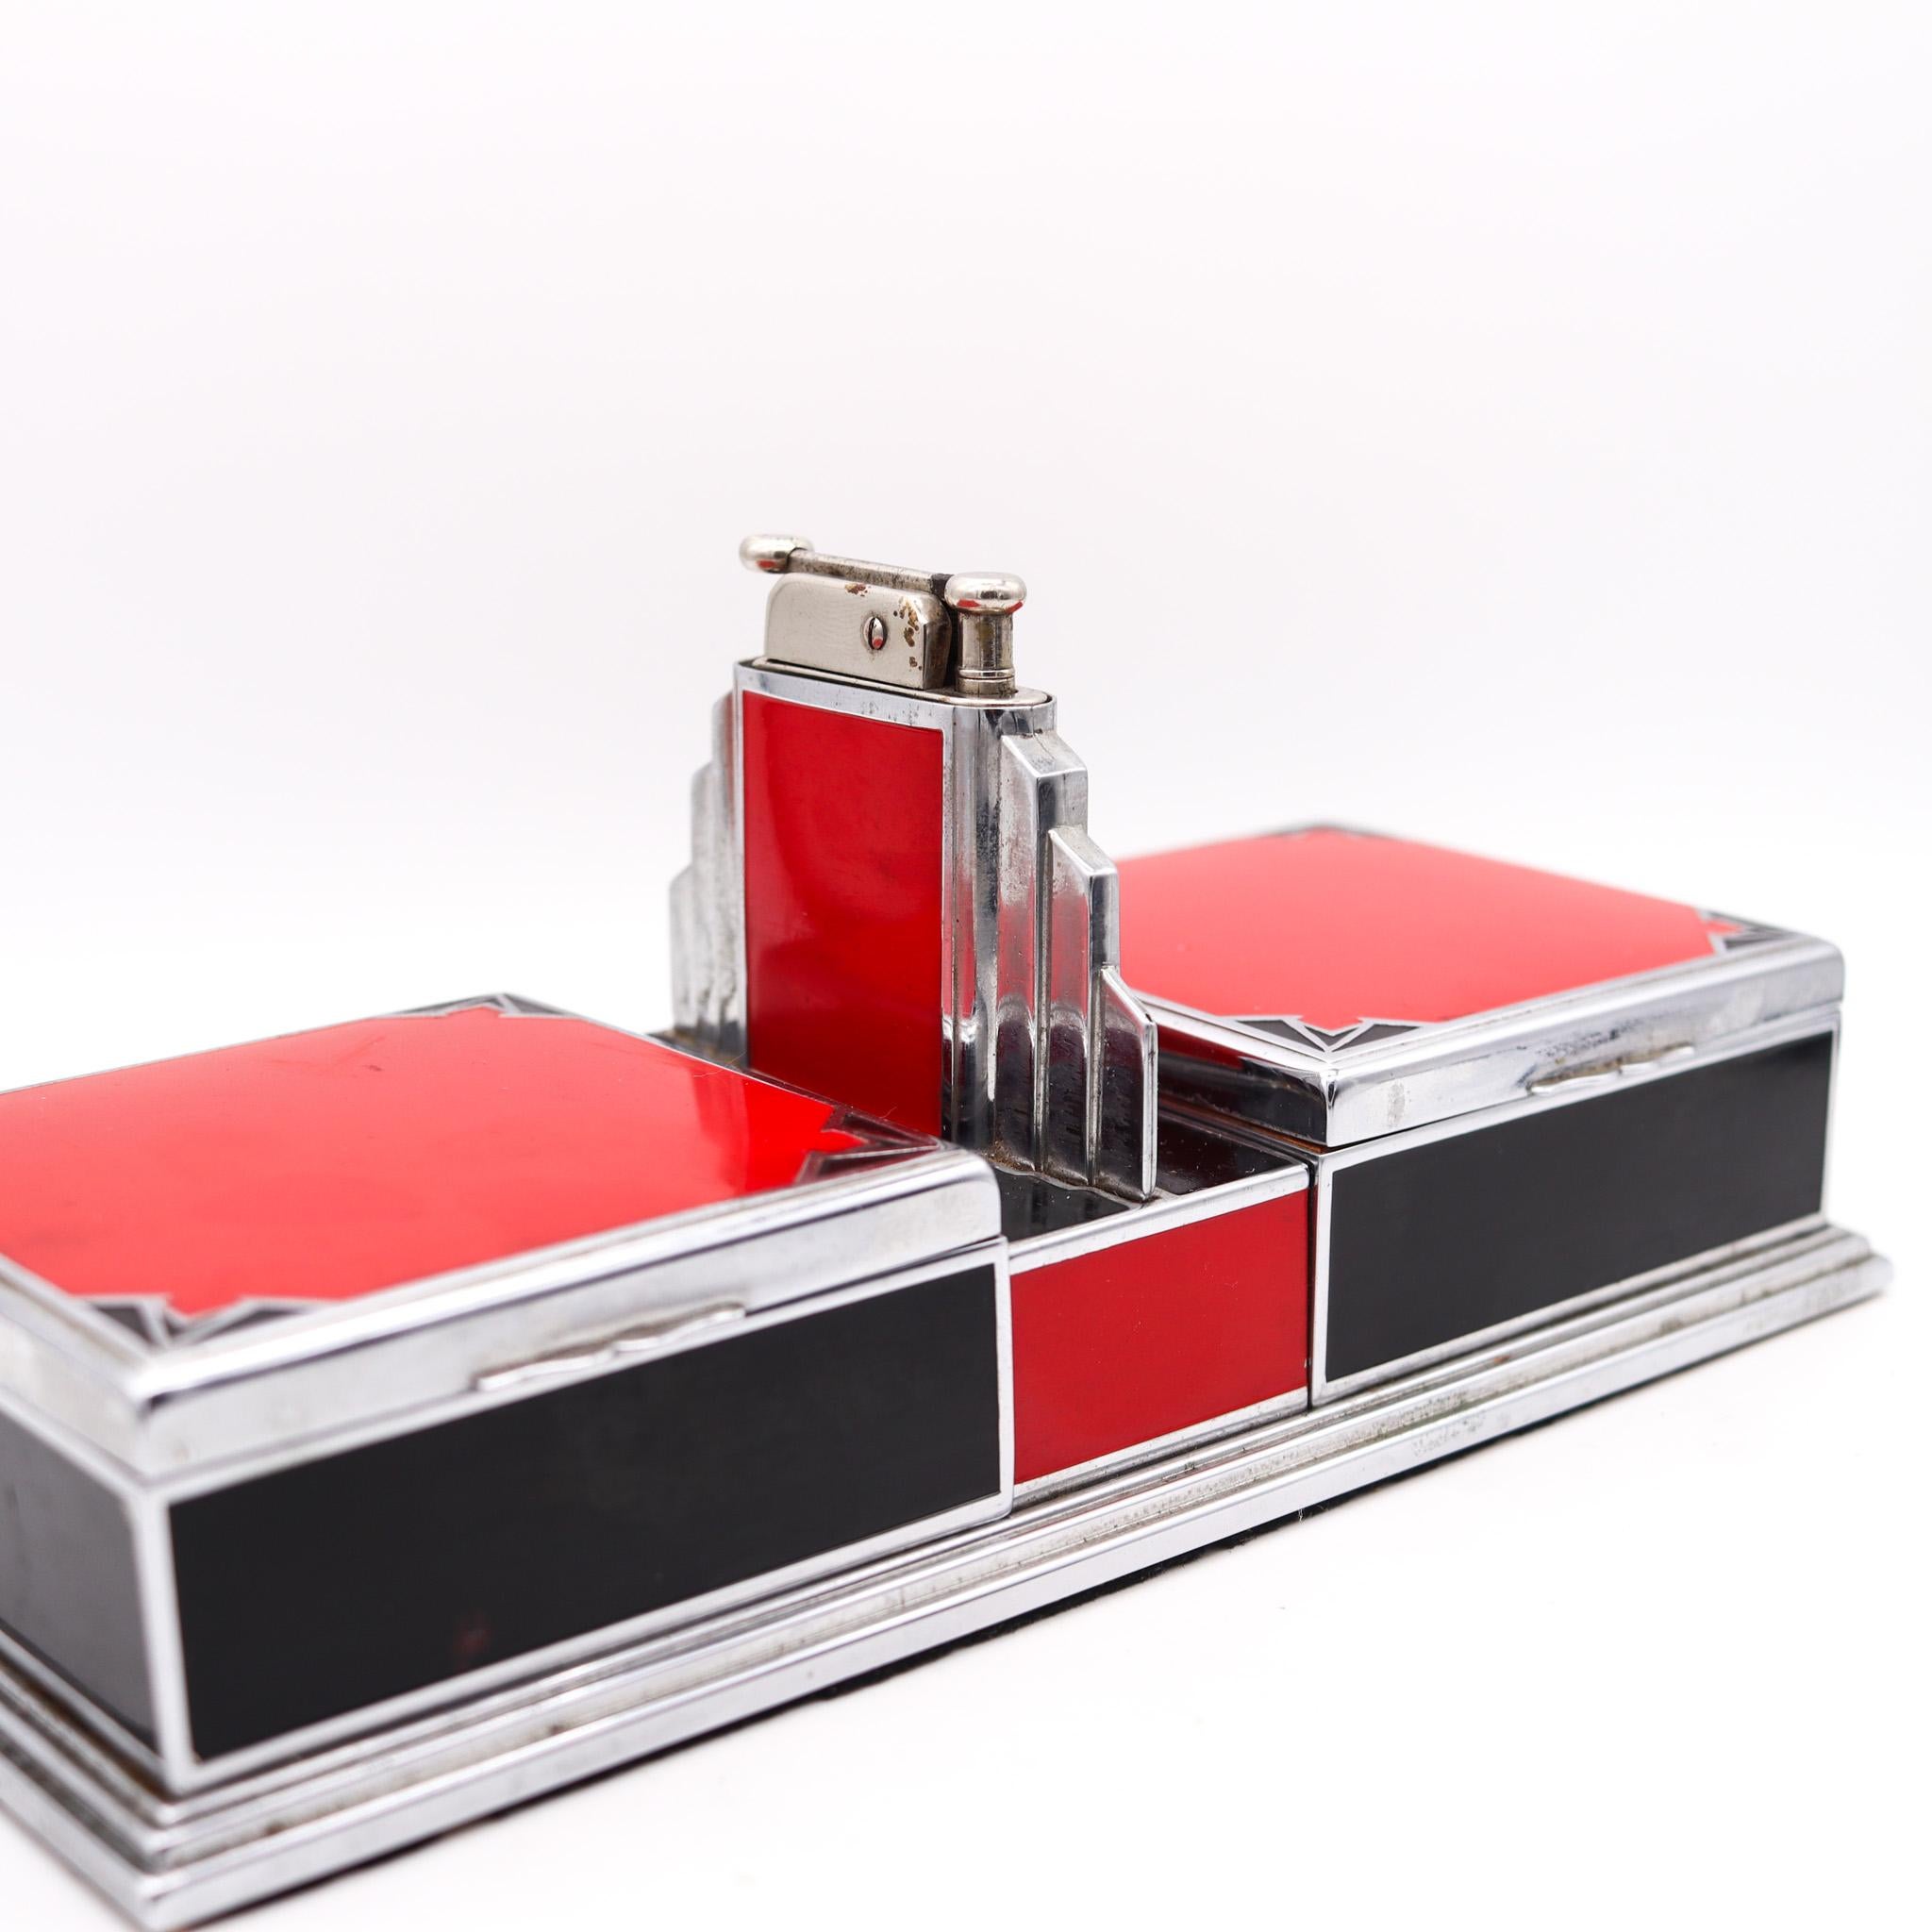 Art deco machine age box designed by Otis-Elgin Craft.

A very fine and rare original 1928 iconic Art Deco Machine Age desk box. This combine a double cigarette smokers box with a removable lighter from the modernist streamlined era of industrial